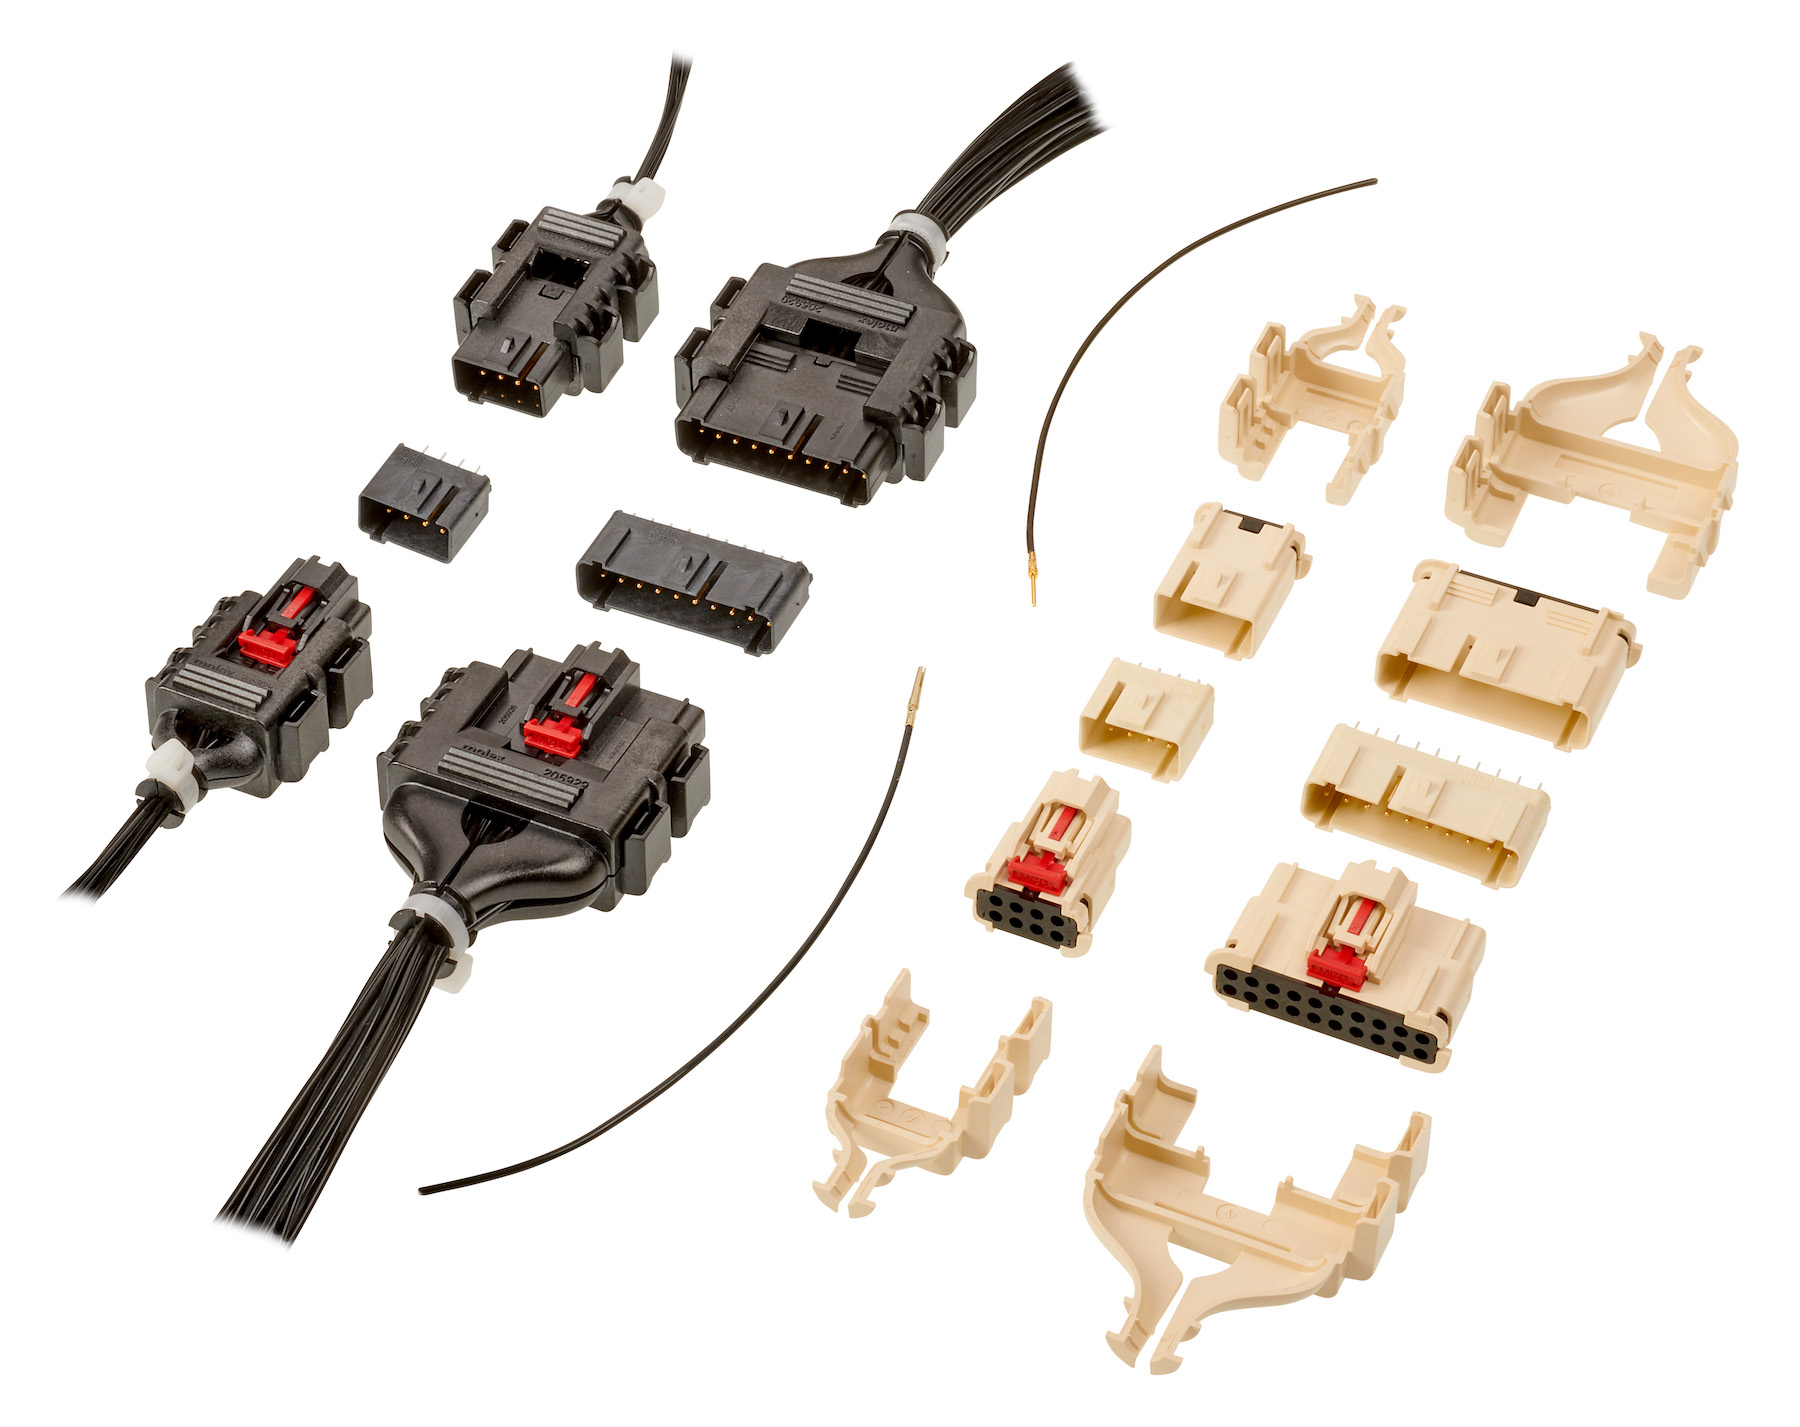 new connectivity products: July 2019, Molex MultiCat Power Connector System